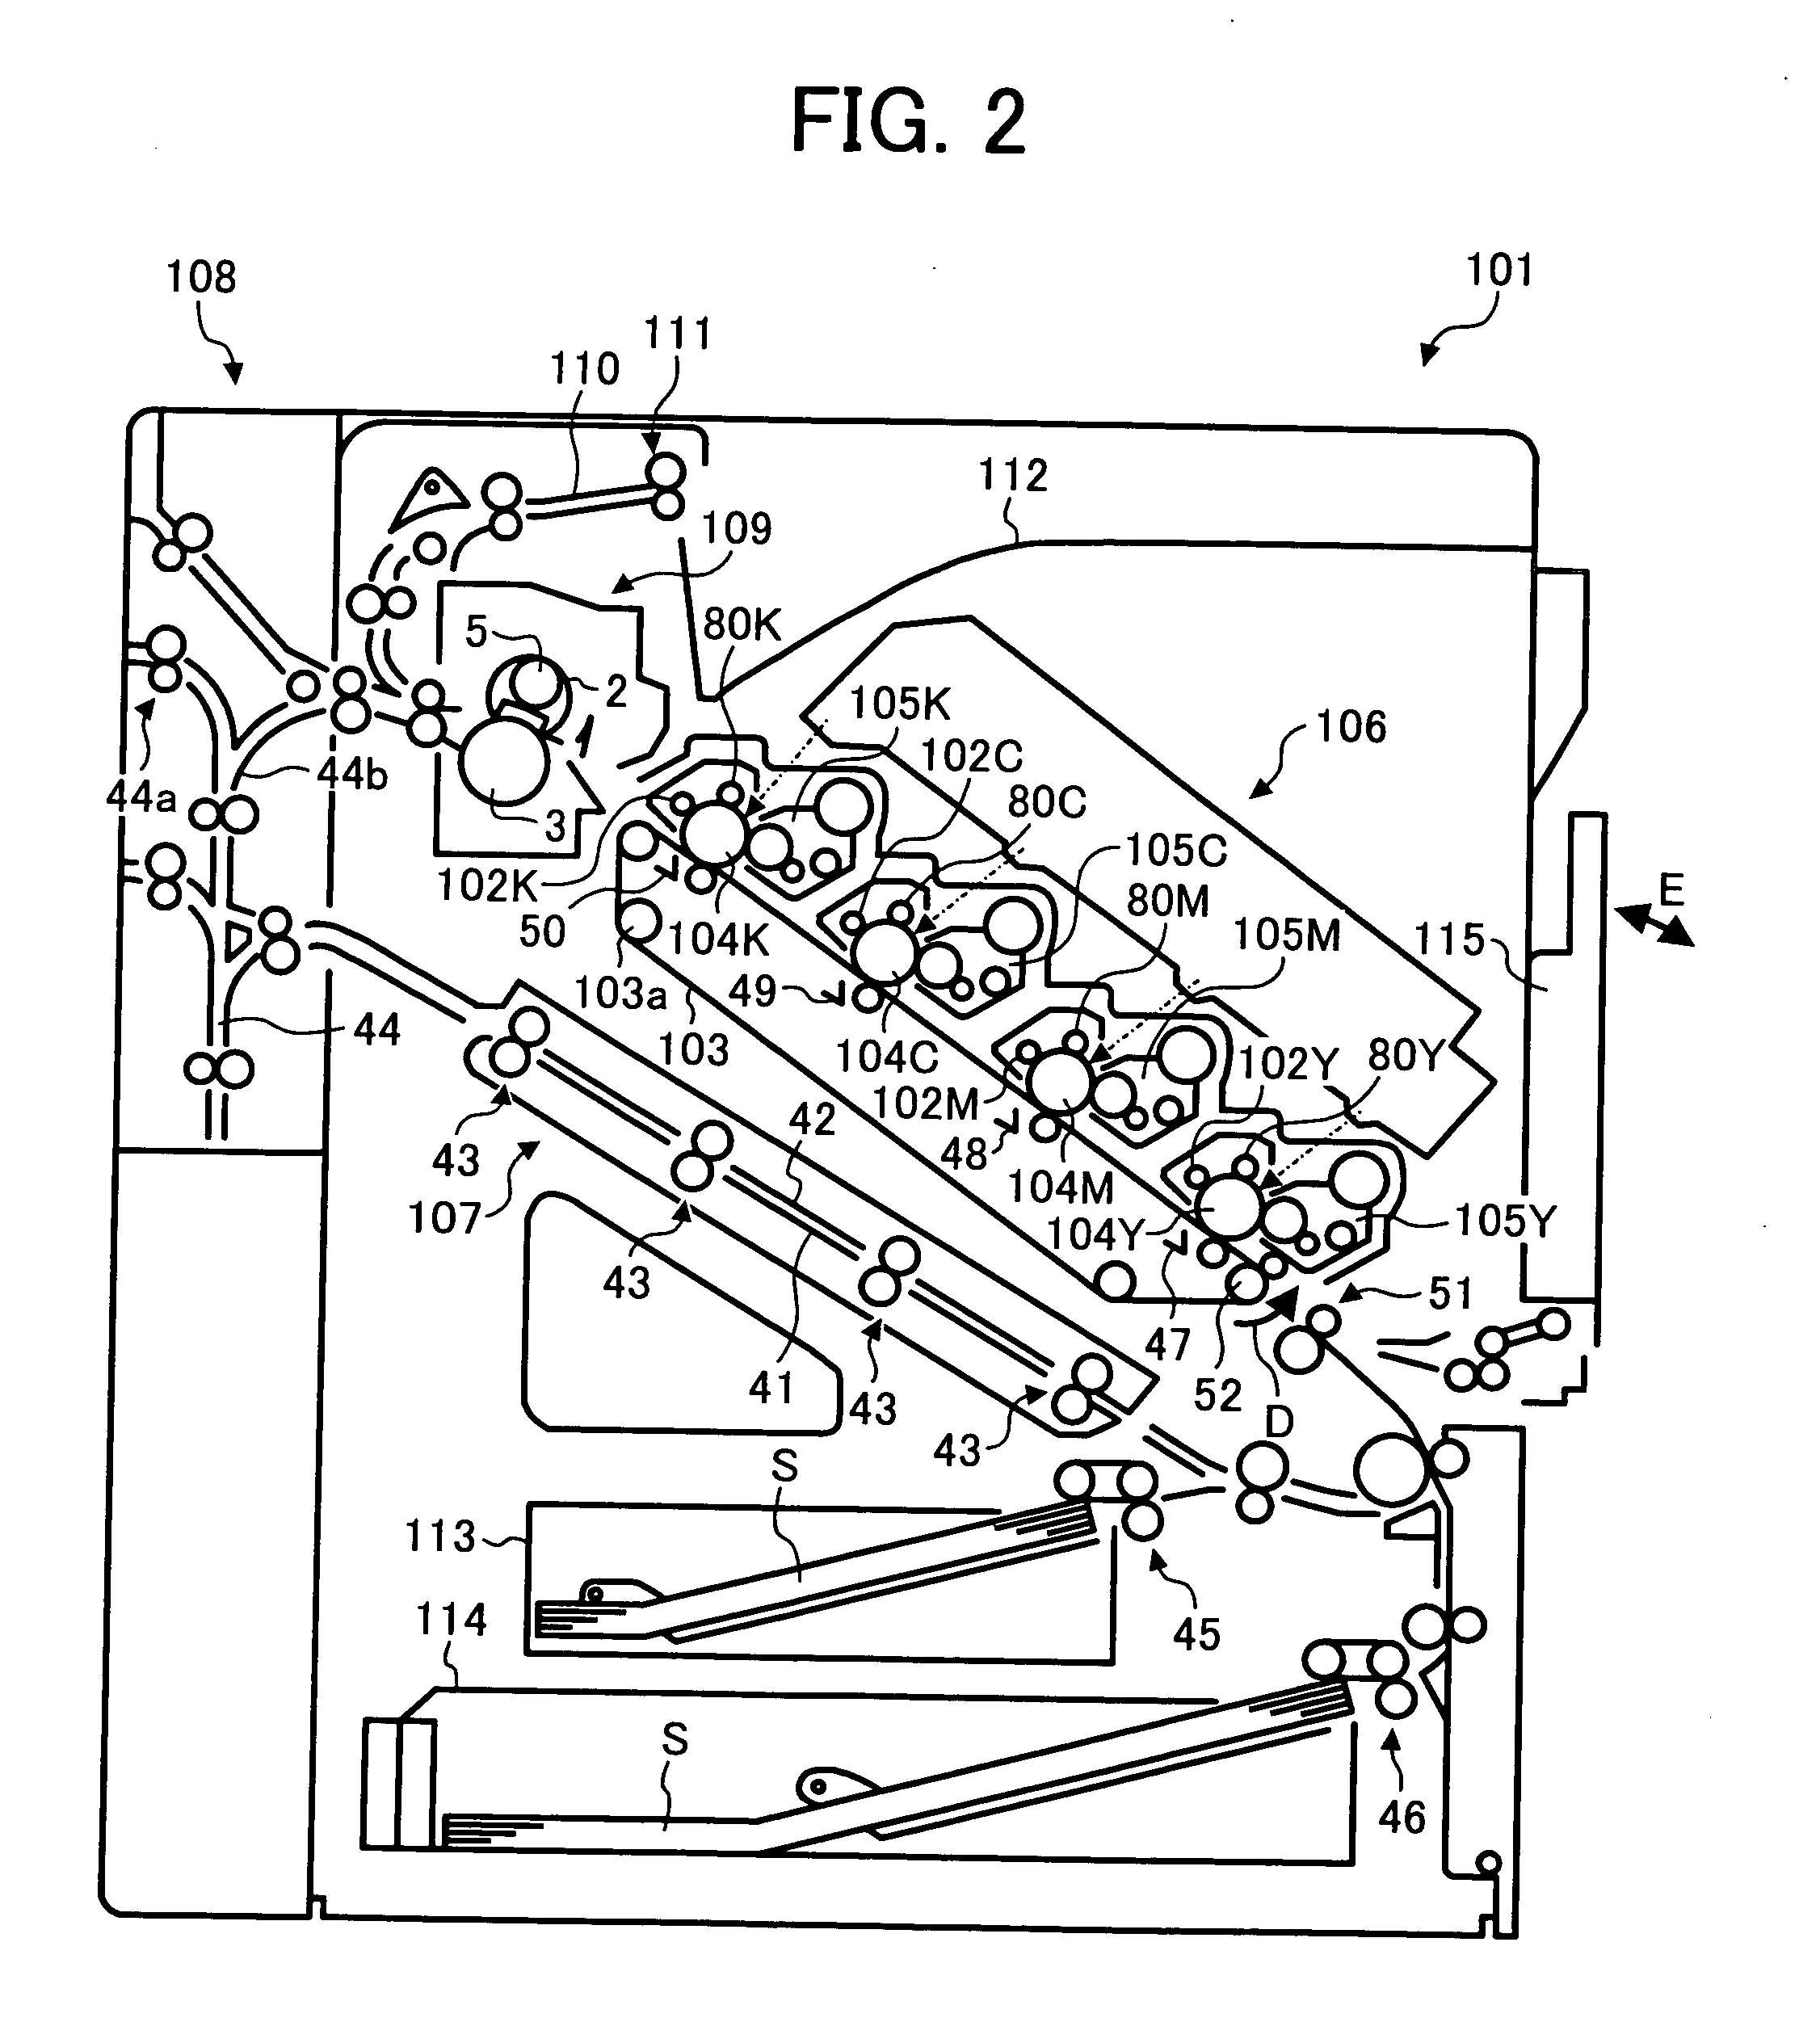 Image forming method and apparatus for fixing an image